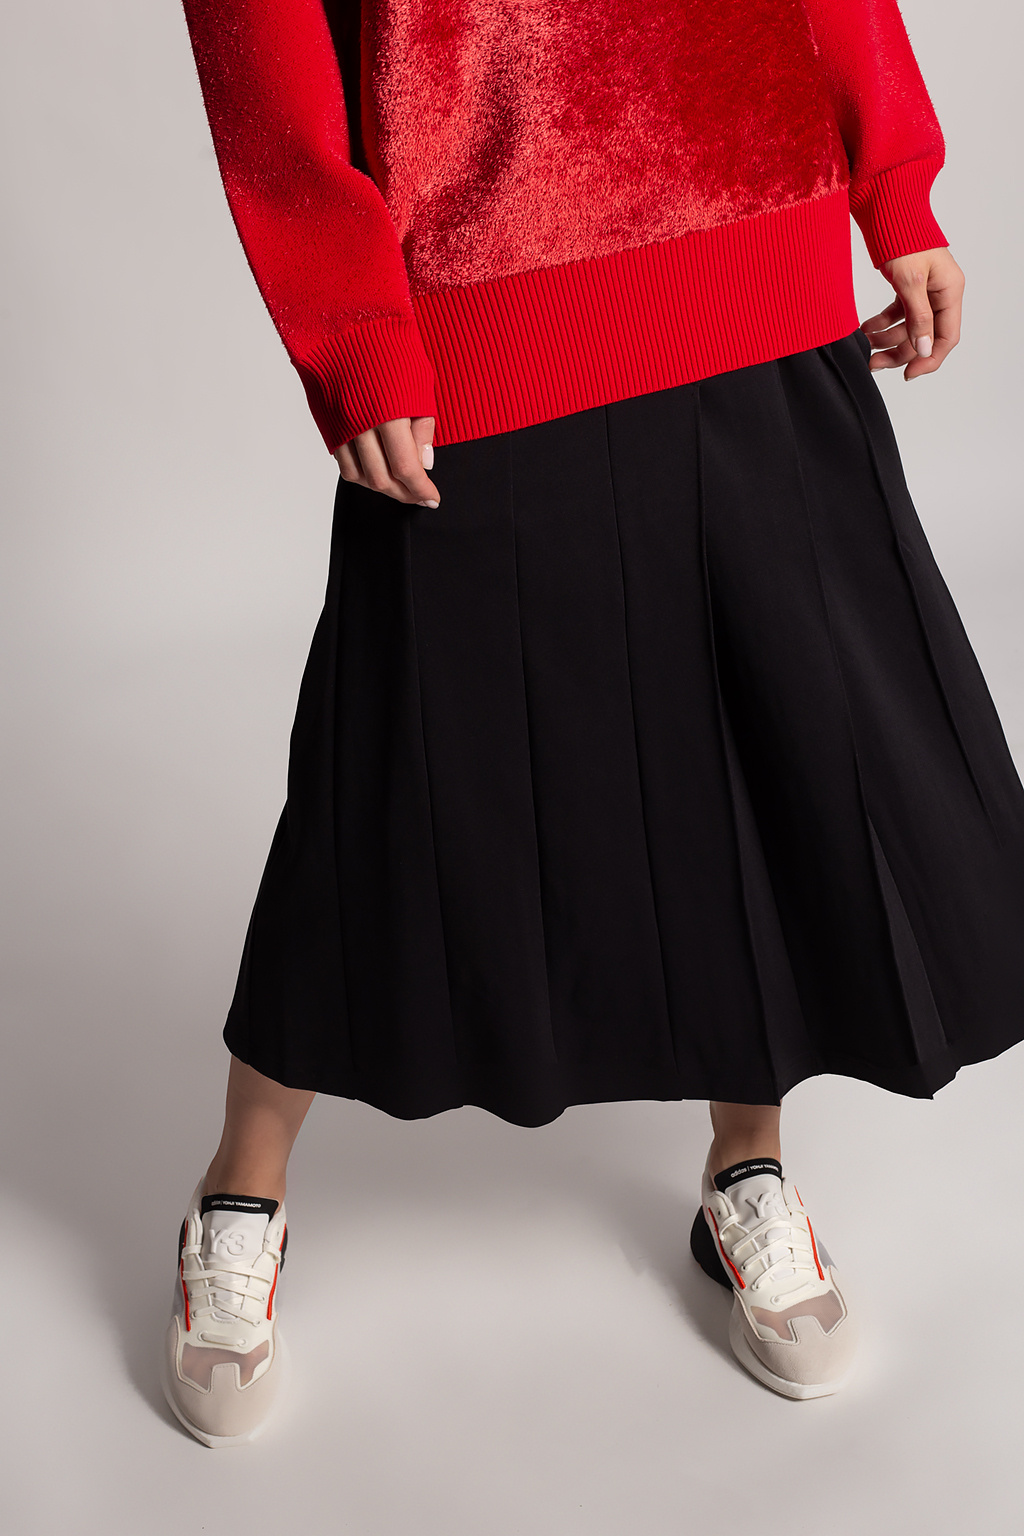 Skirt with stitching details Add to wish list